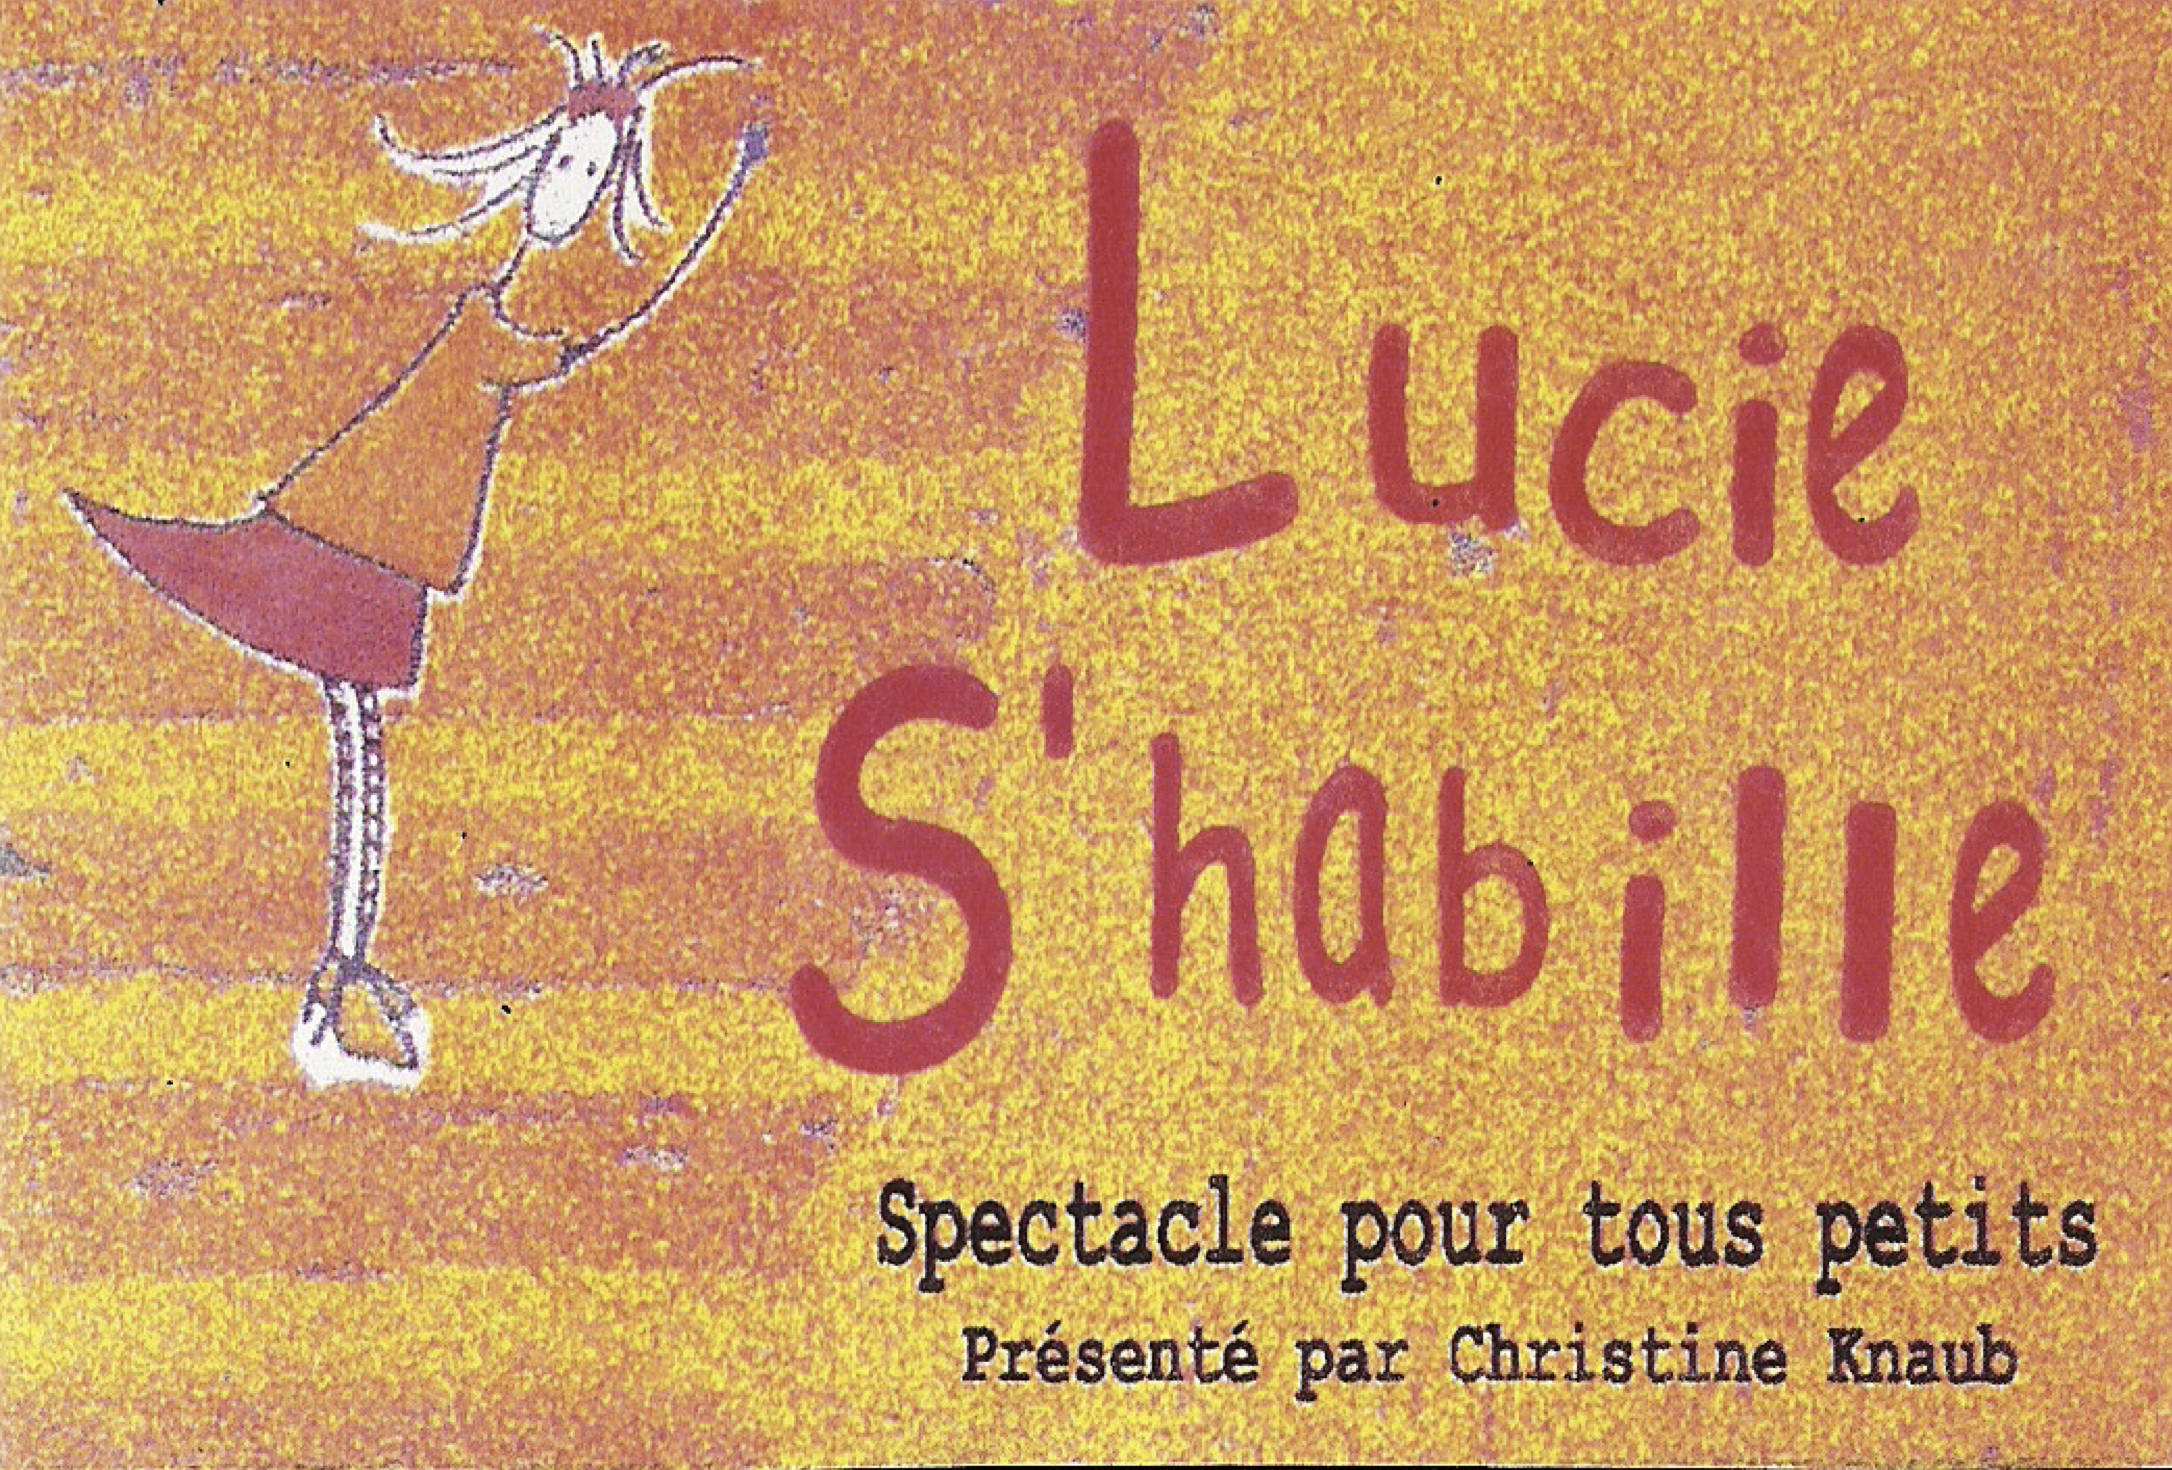 Lucie s’habille